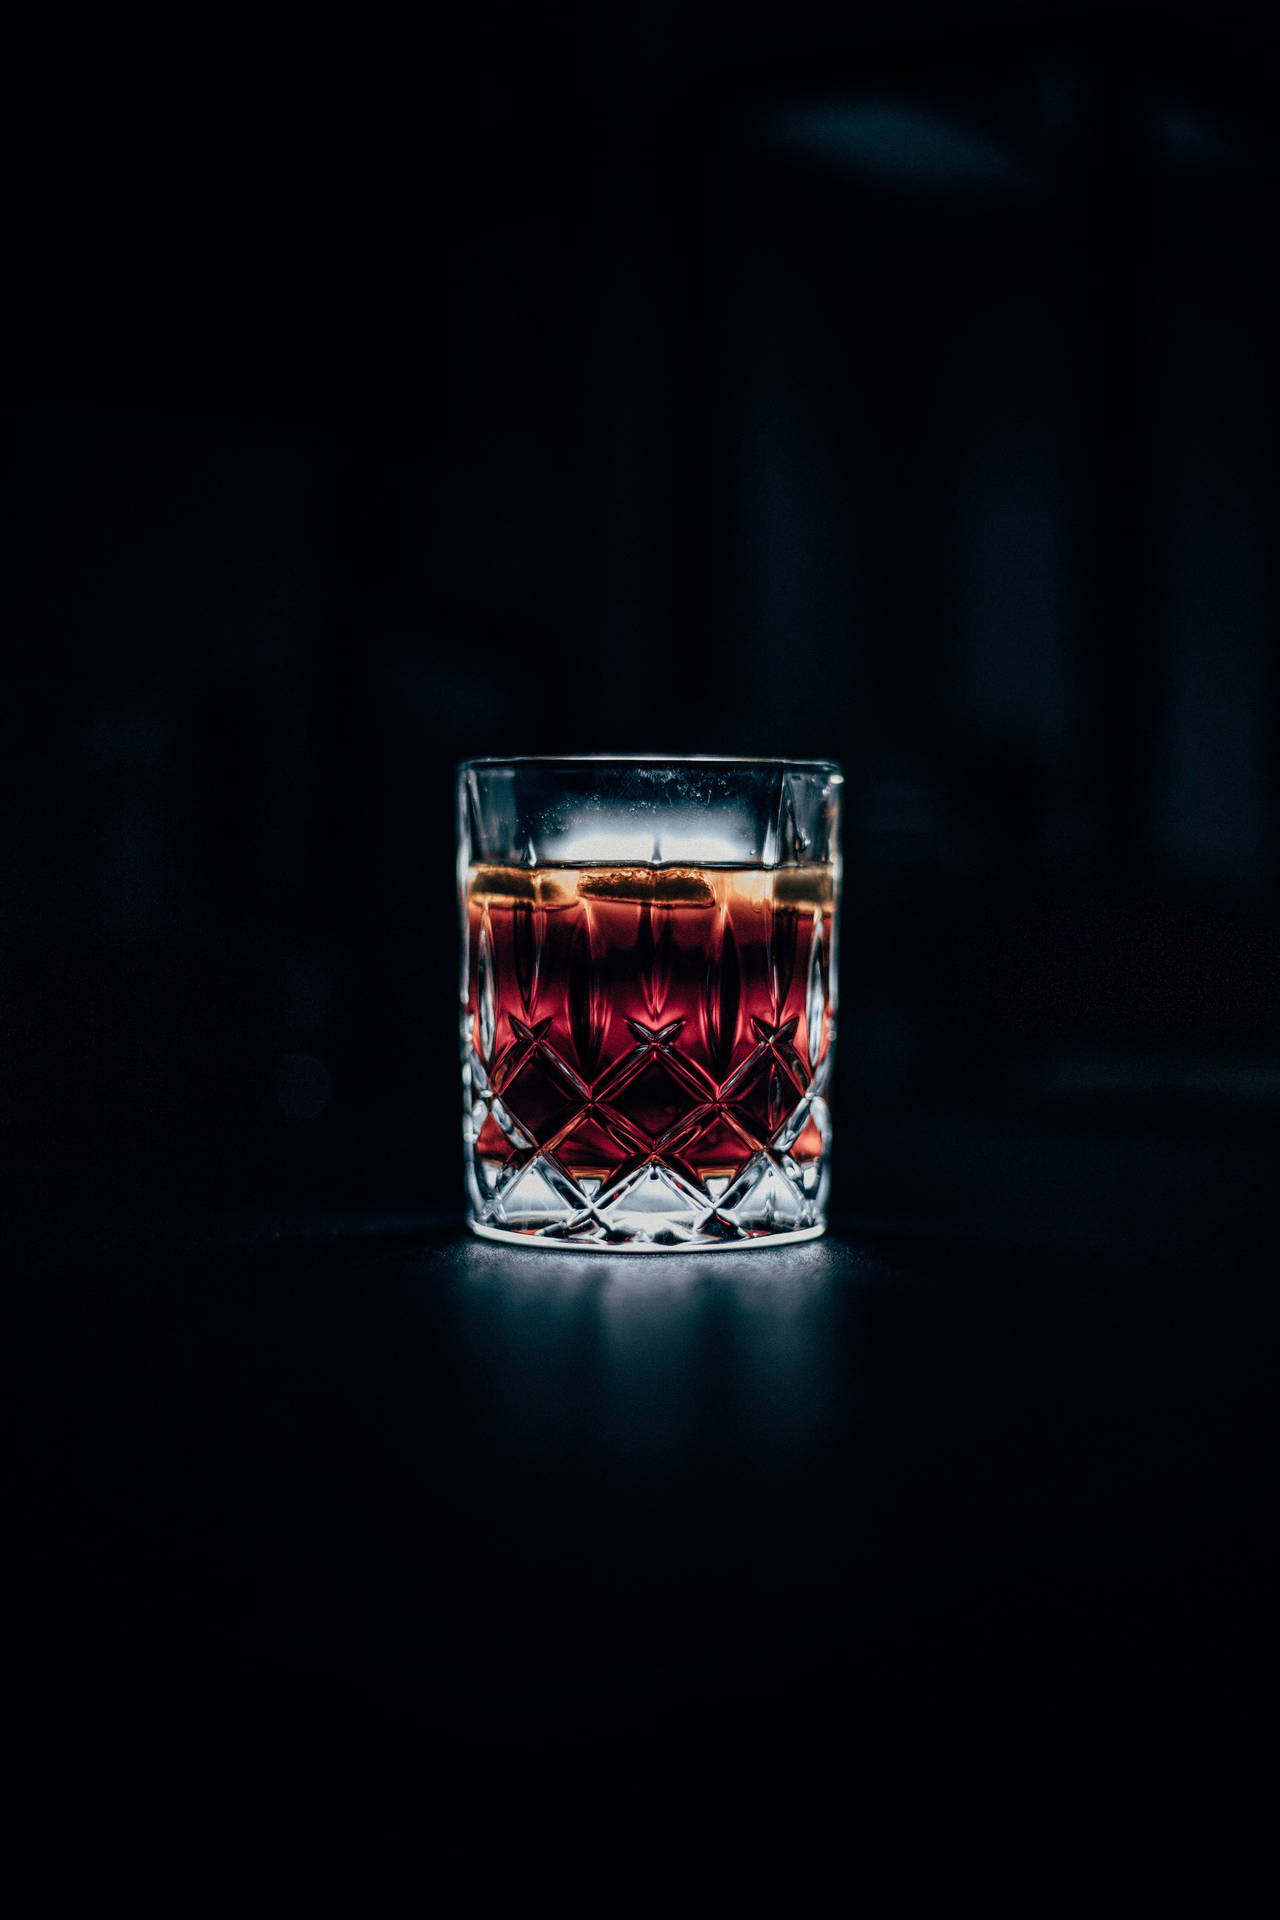 Top 999+ Whiskey Wallpaper Full HD, 4K✅Free to Use